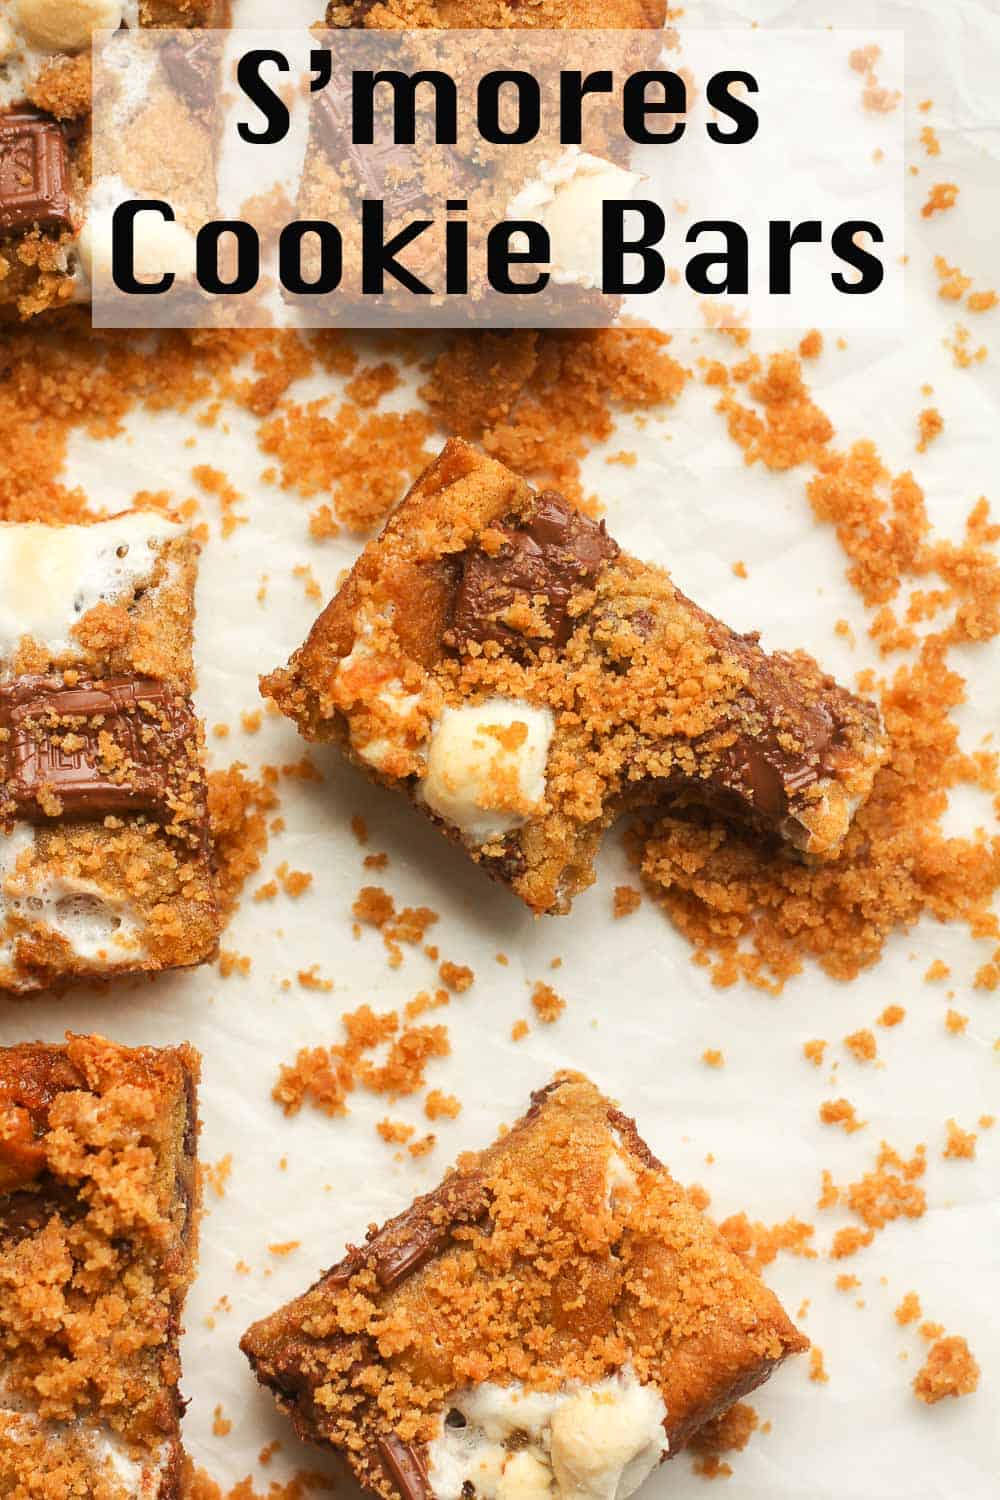 A s'mores cookie bar with a bite out with crumbs.